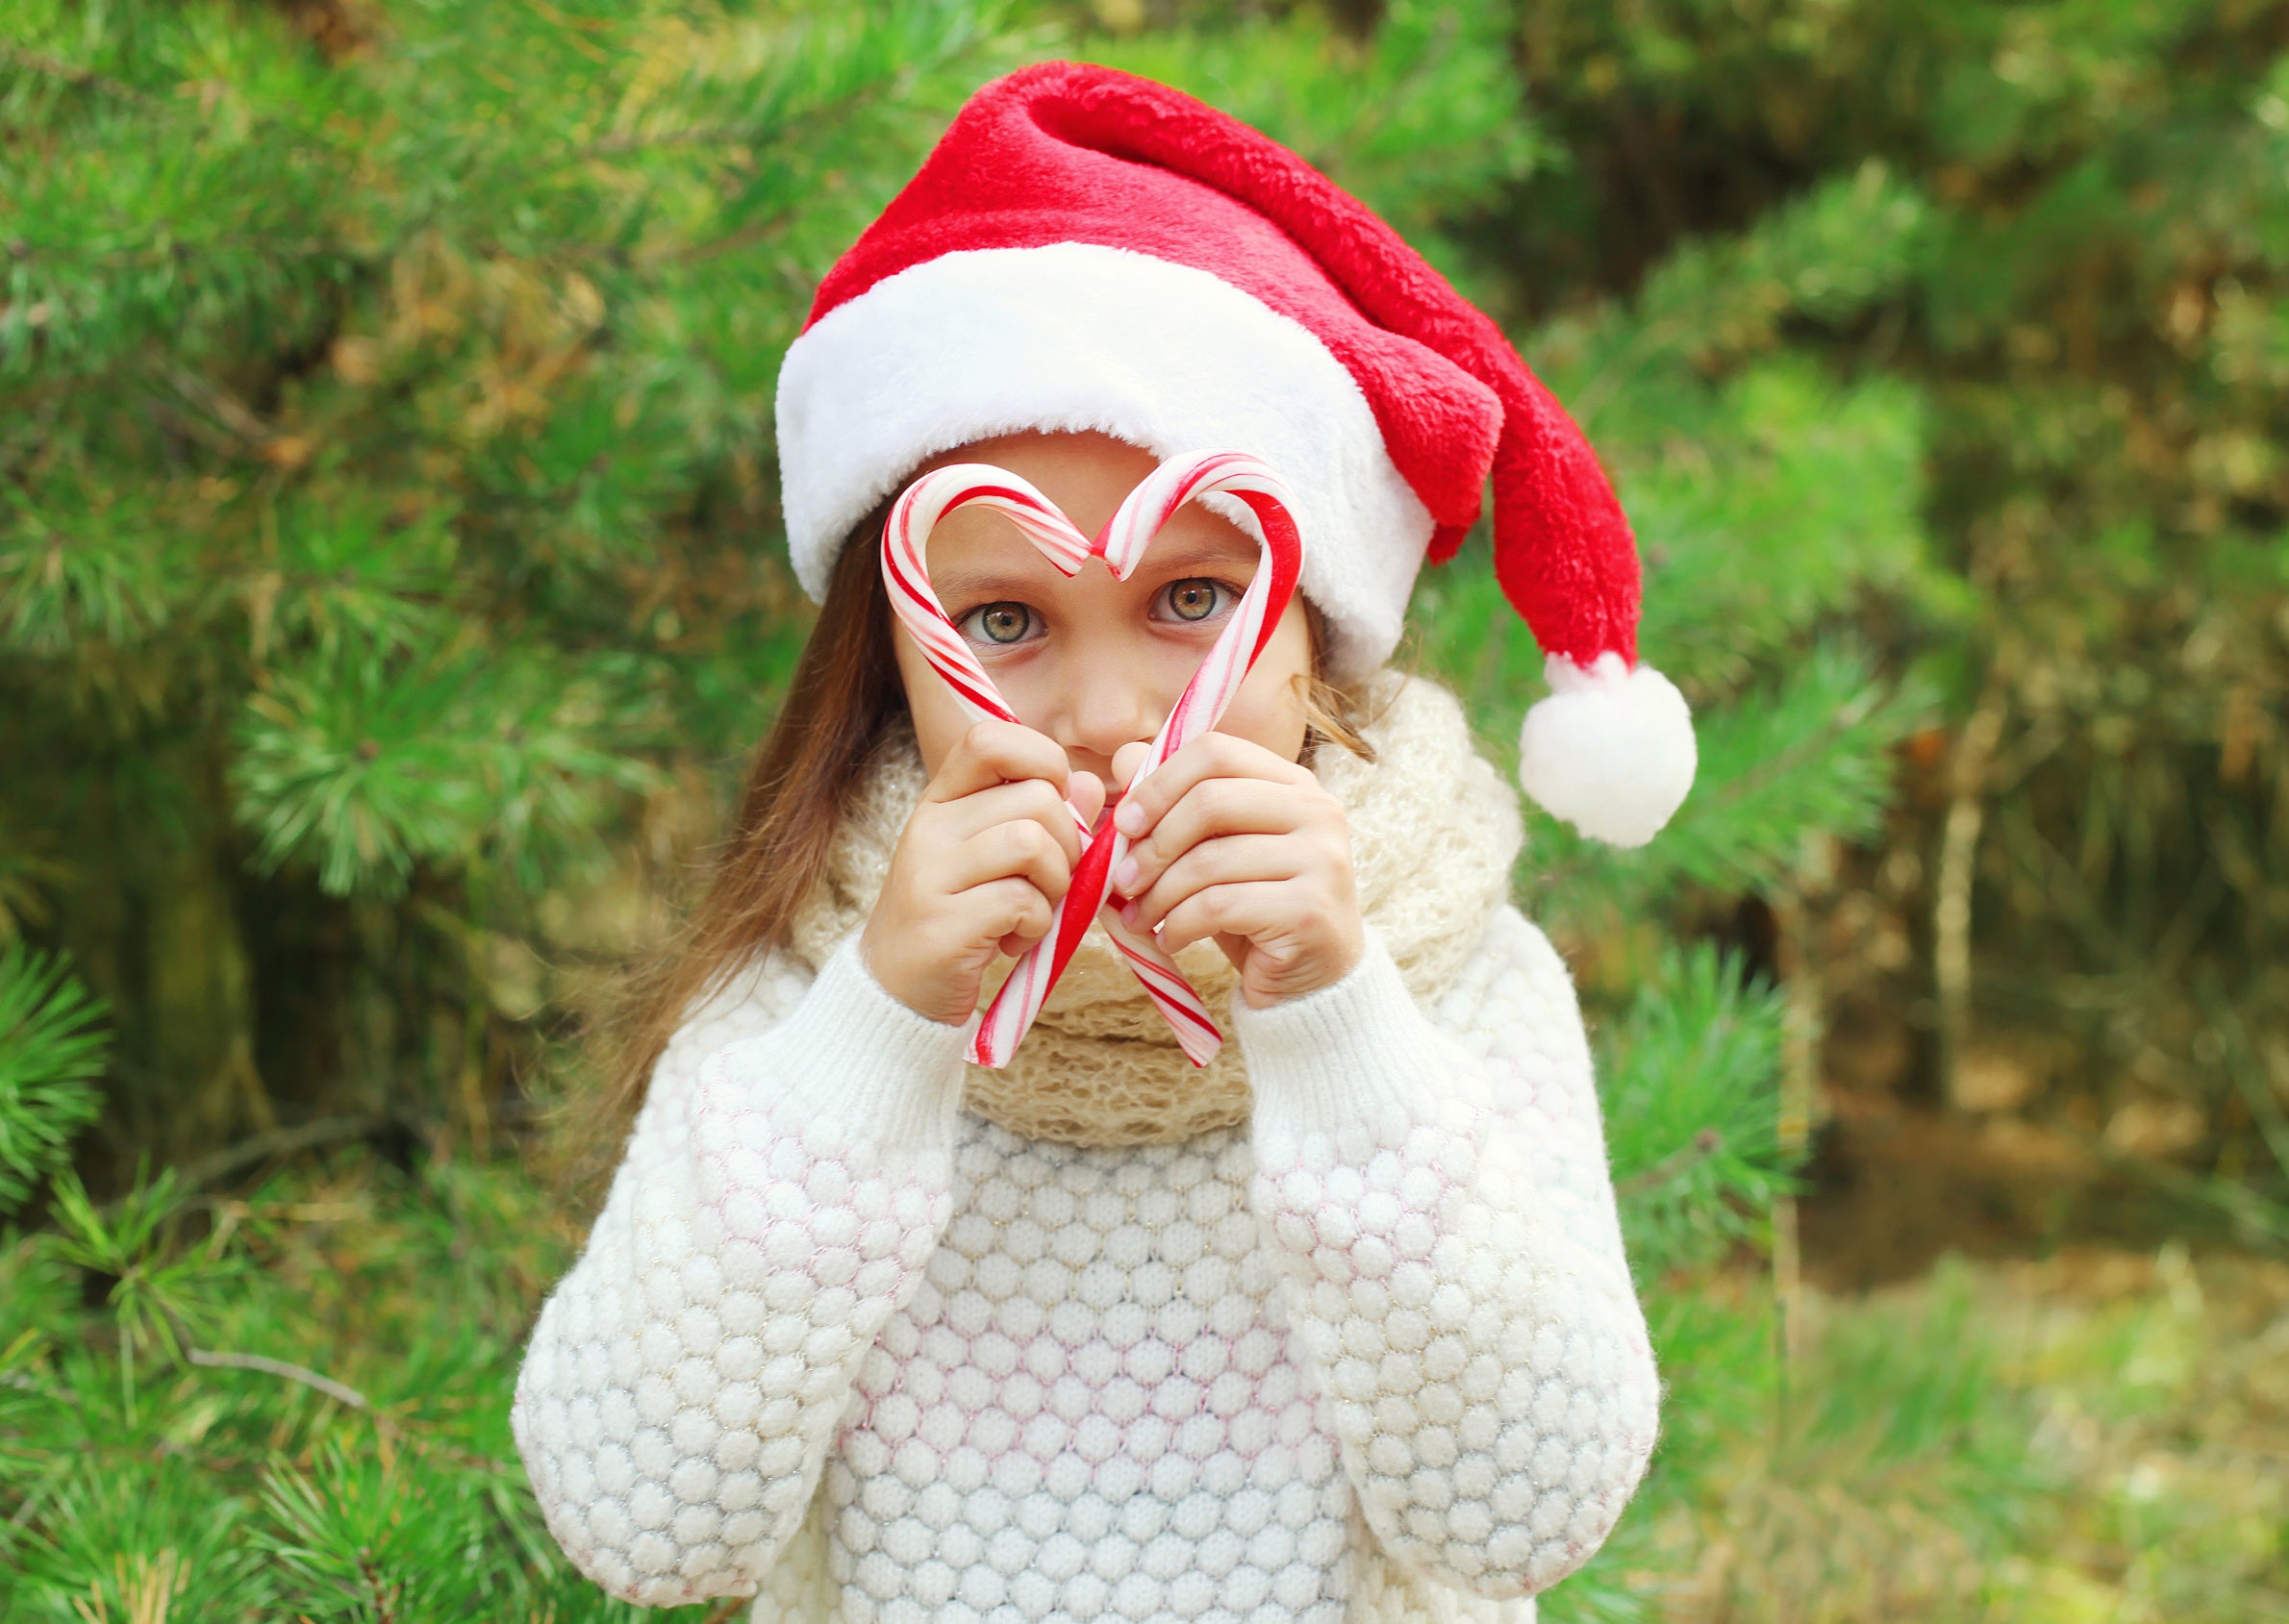 Holiday photo of a little girl holding candy canes and wearing a Santa hat outdoors